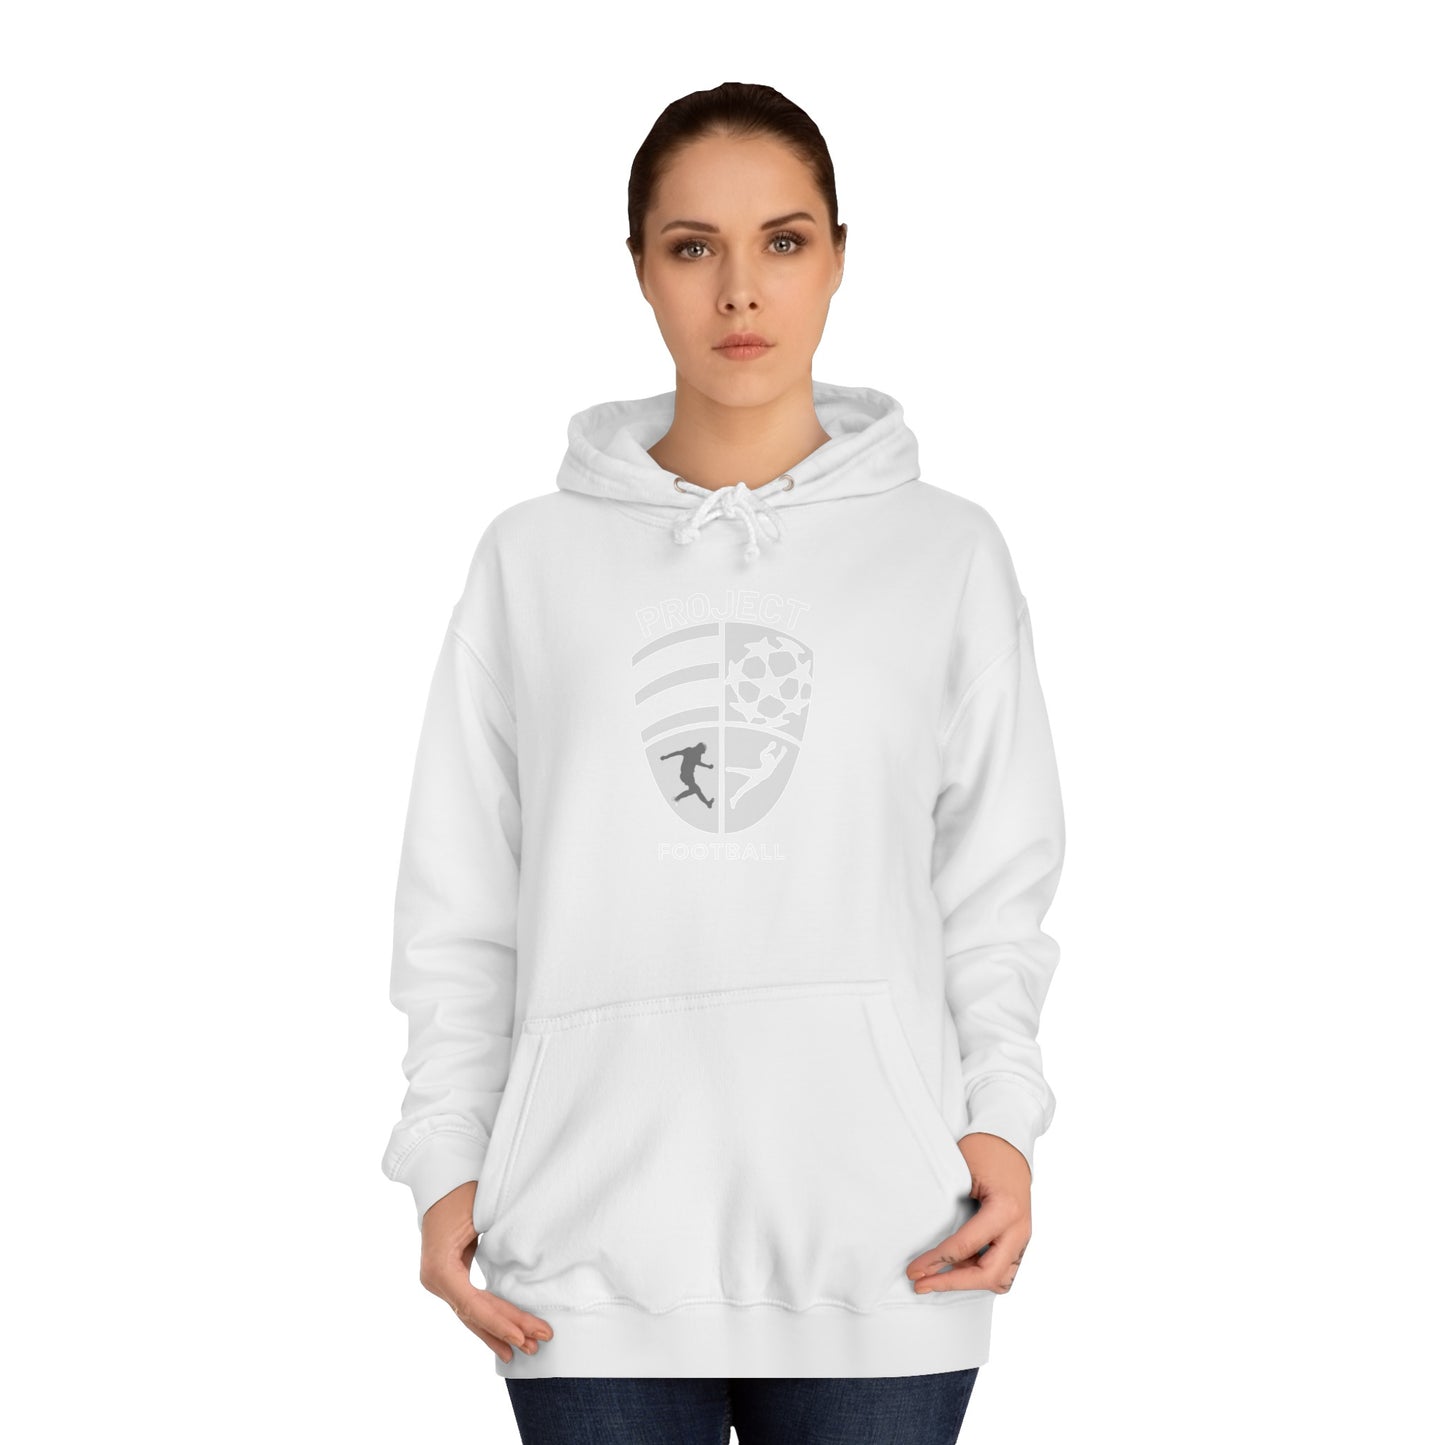 Project Football Hoodie